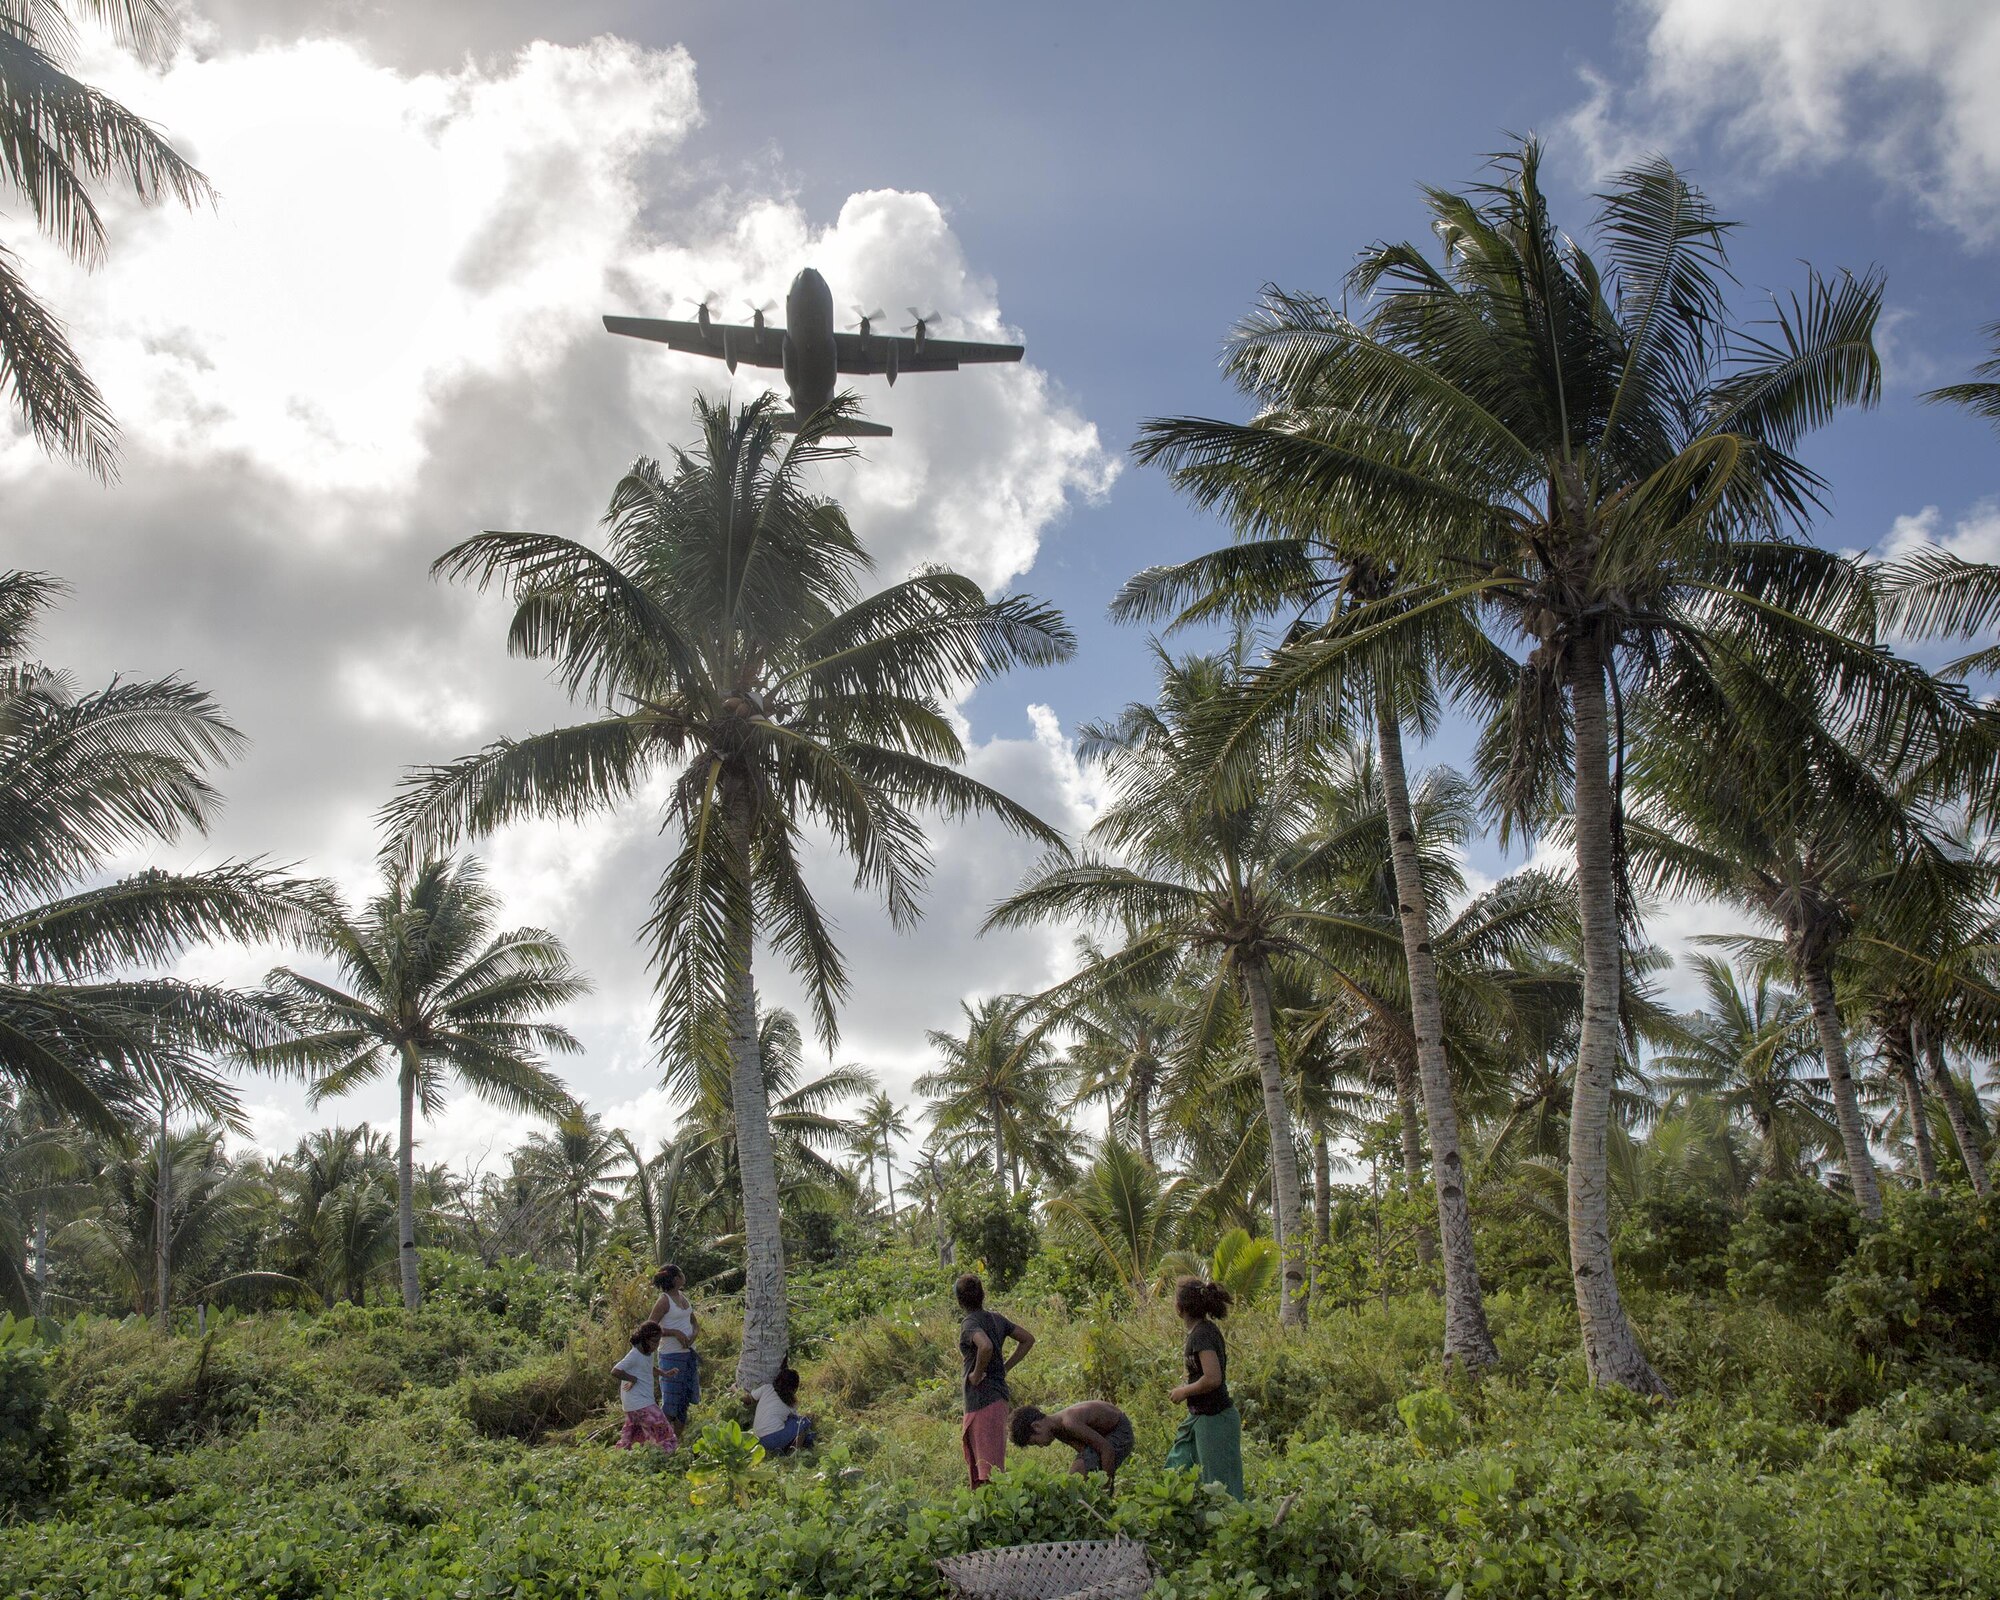 Islanders from Fais watch a C-130 Hercules fly over head during Operation Christmas Drop 2015, at Fais island, Federated States of Micronesia, Dec. 8, 2015. A C-130 Hercules assigned to the 36th Airlift Squadron delivered over 800 pounds of supplies to the island of Fais during Operation Christmas Drop 2015. This year marks the first ever trilateral Operation Christmas Drop where the U.S. Air Force, Japan Air Self-Defense Force and the Royal Australian Air Force work together to provide critical supplies to 56 Micronesian islands.(U.S. Air Force photo by Osakabe Yasuo/Released)